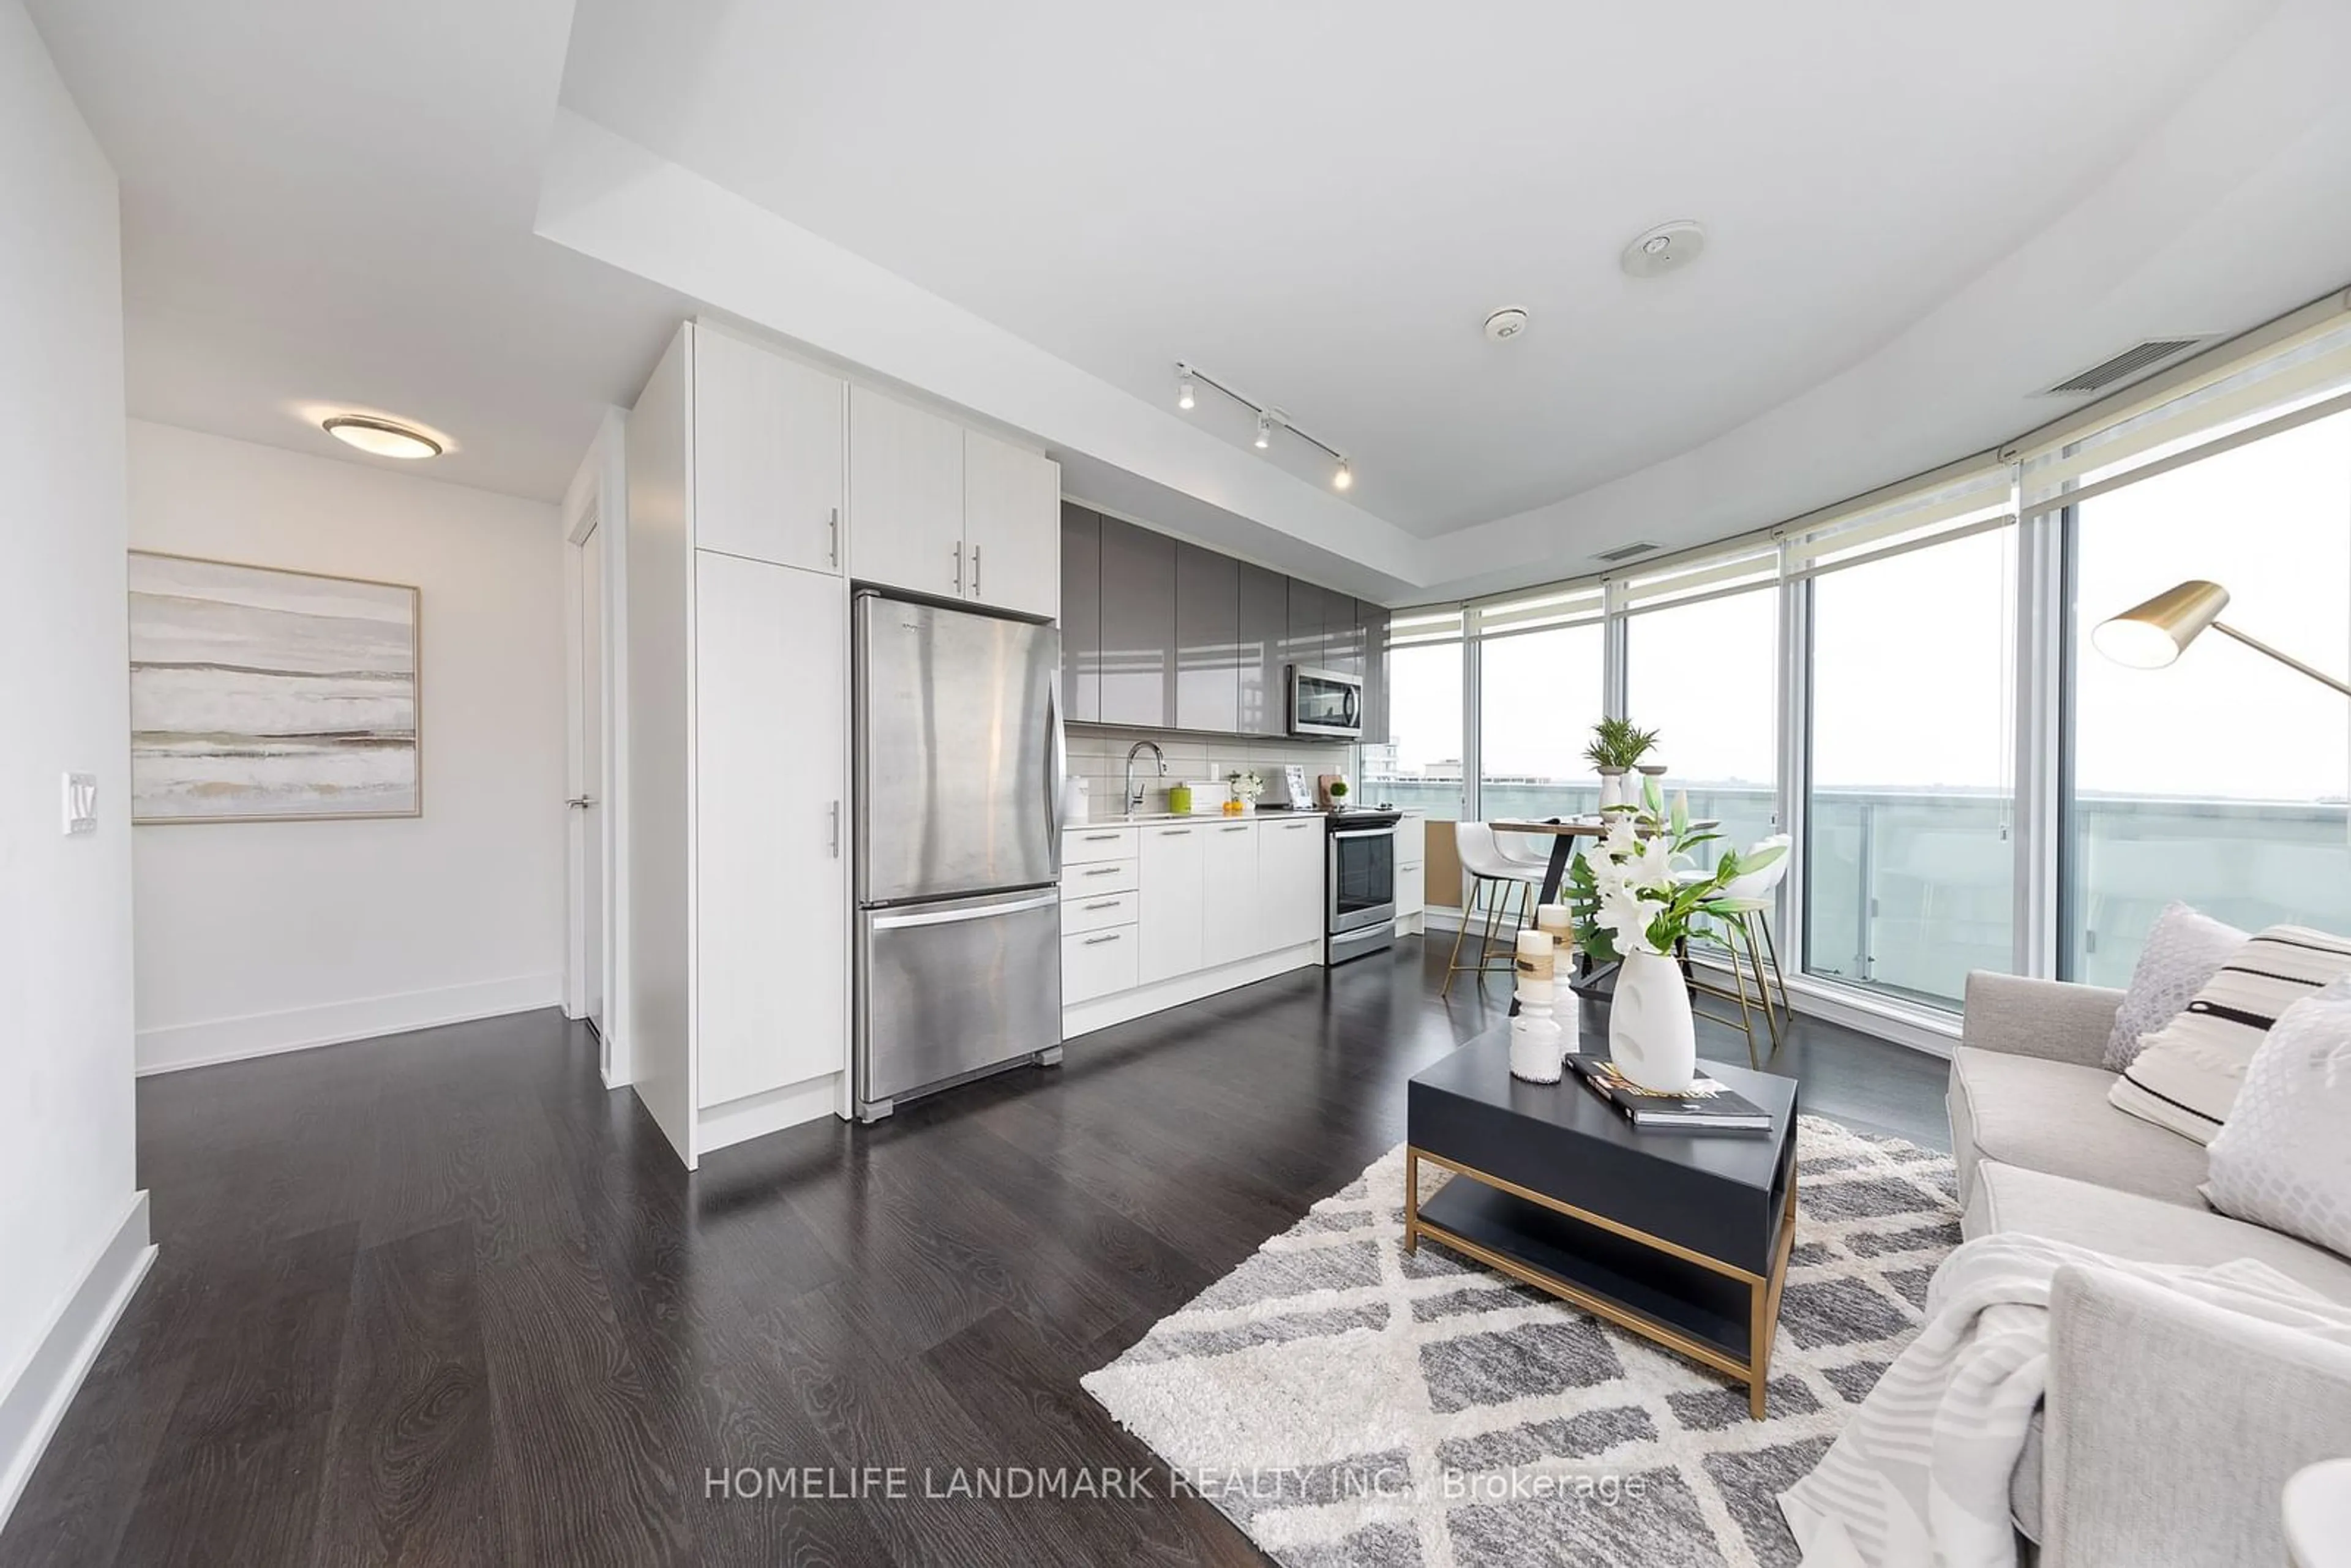 Contemporary kitchen for 403 Church St ##2812, Toronto Ontario M4Y 0C9